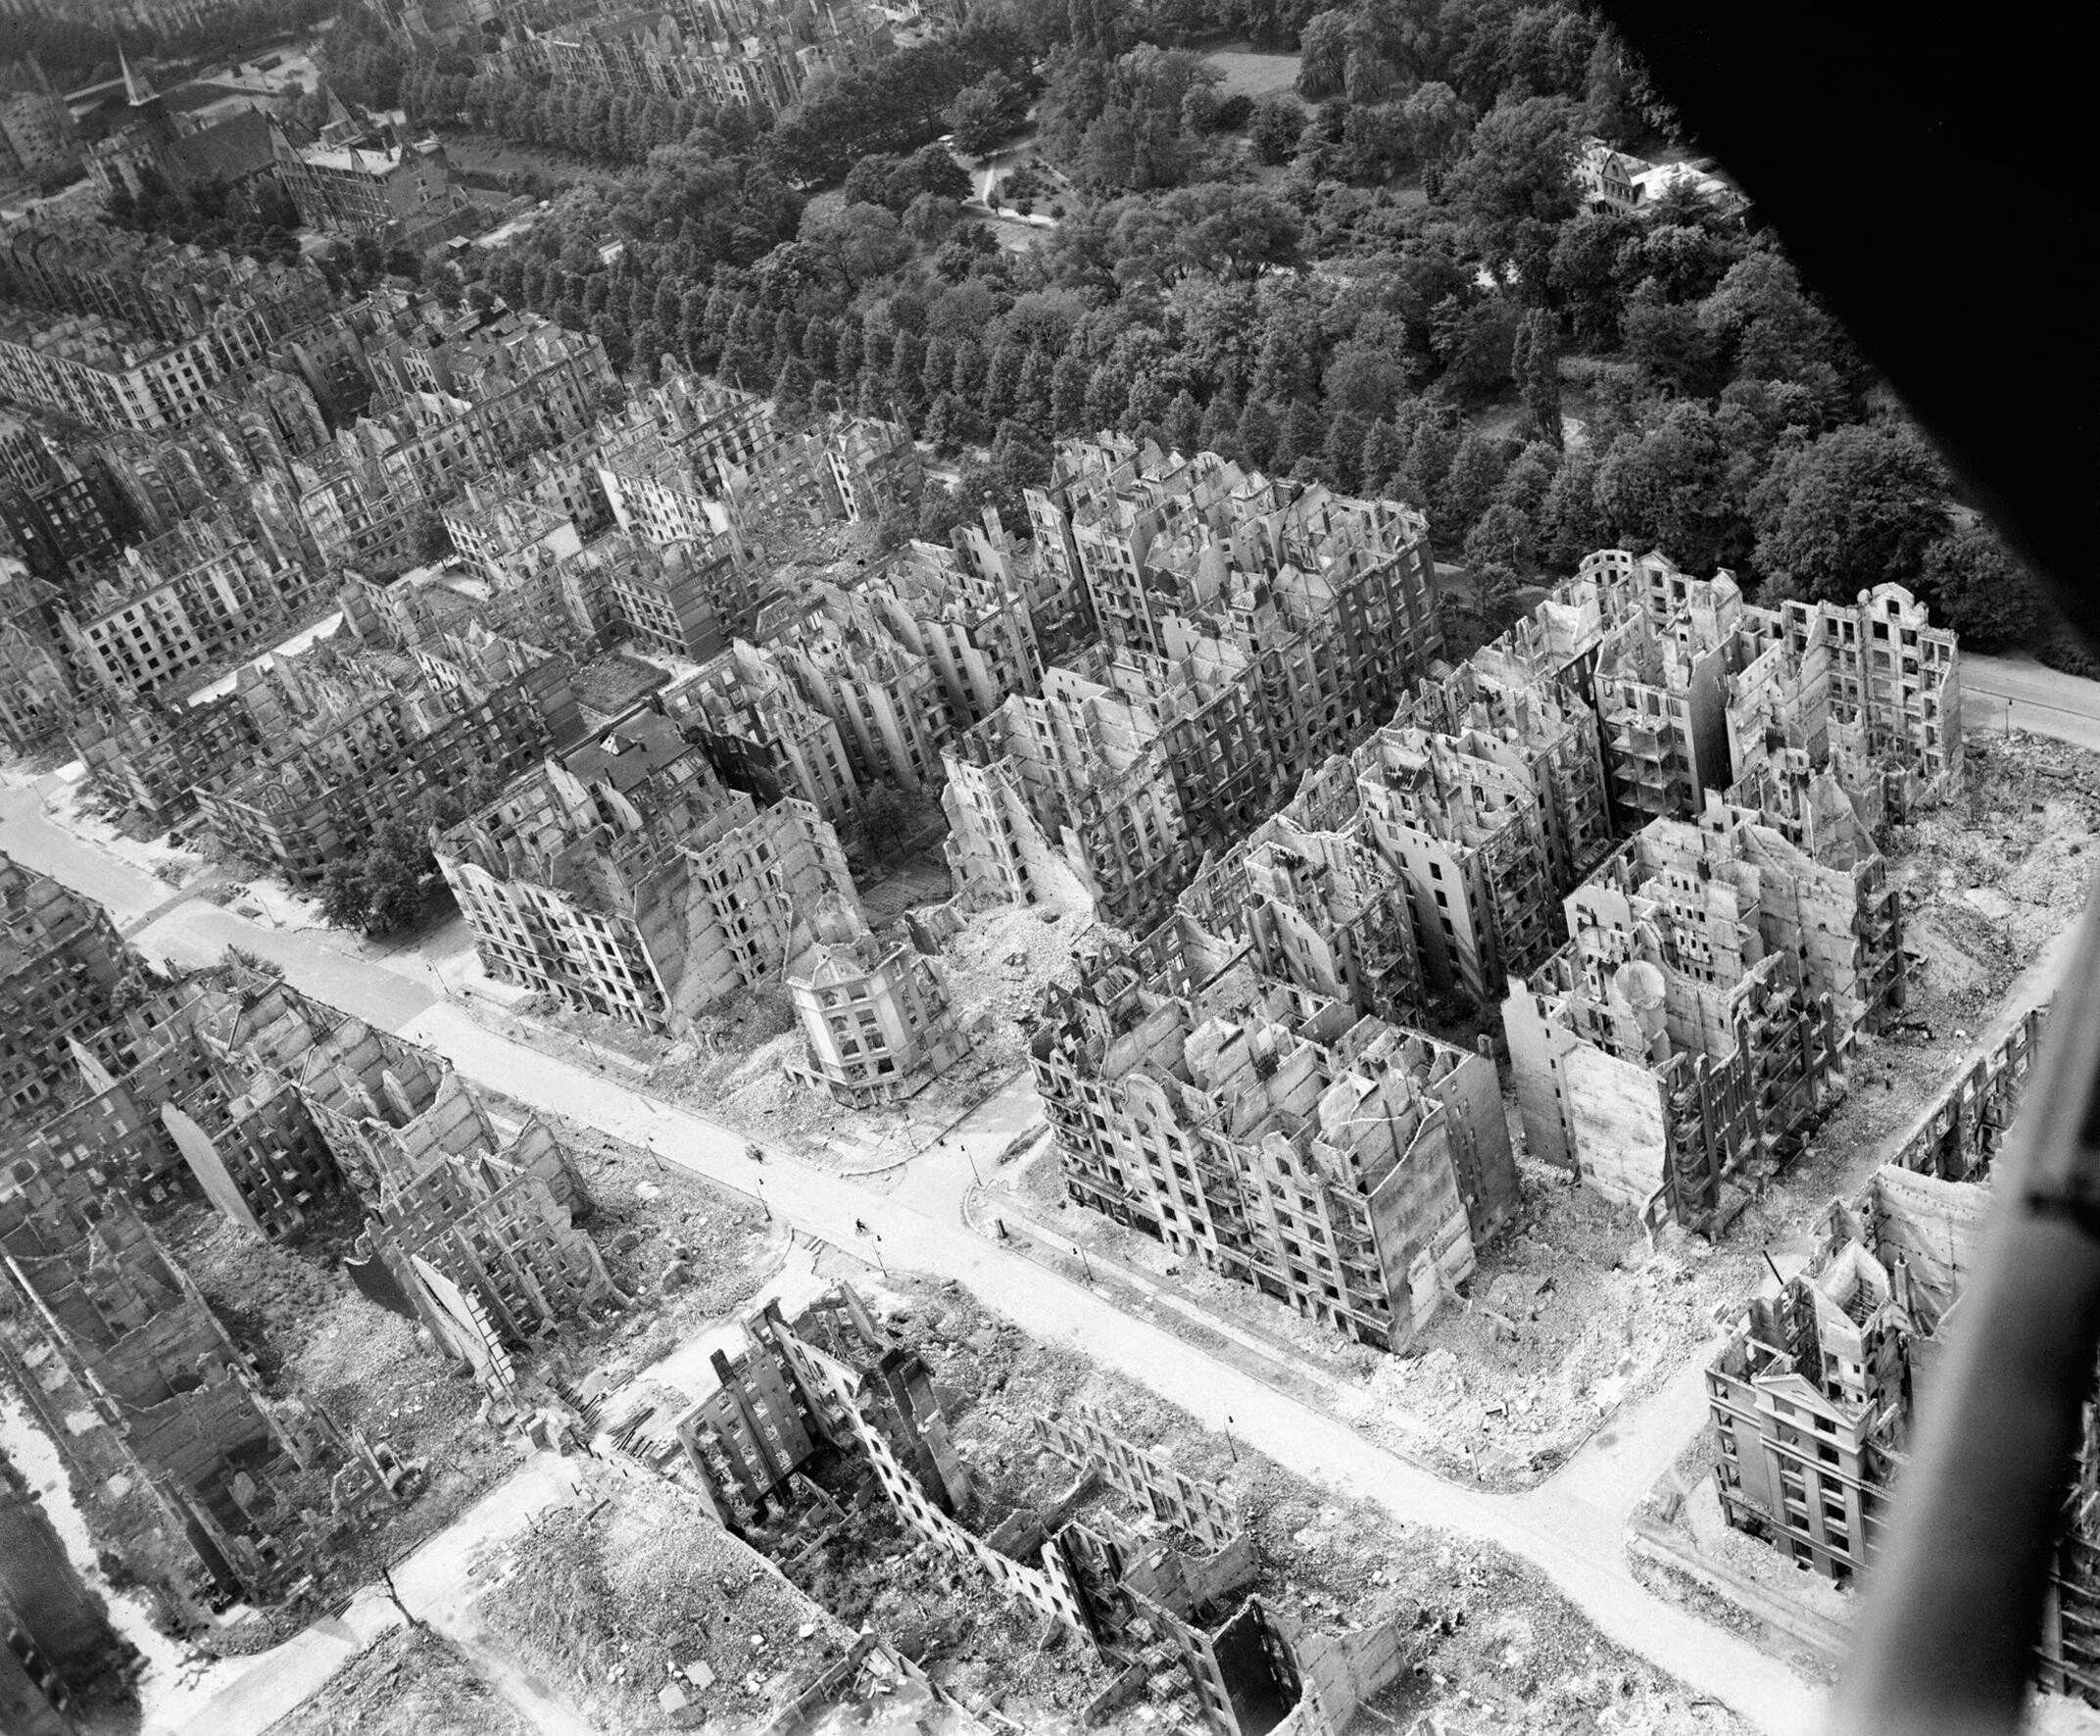 WWII HUGE 11X14 AERIAL PHOTO 8TH USAAF RECON MISSION OVER HAMBURG GERMANY PORT 